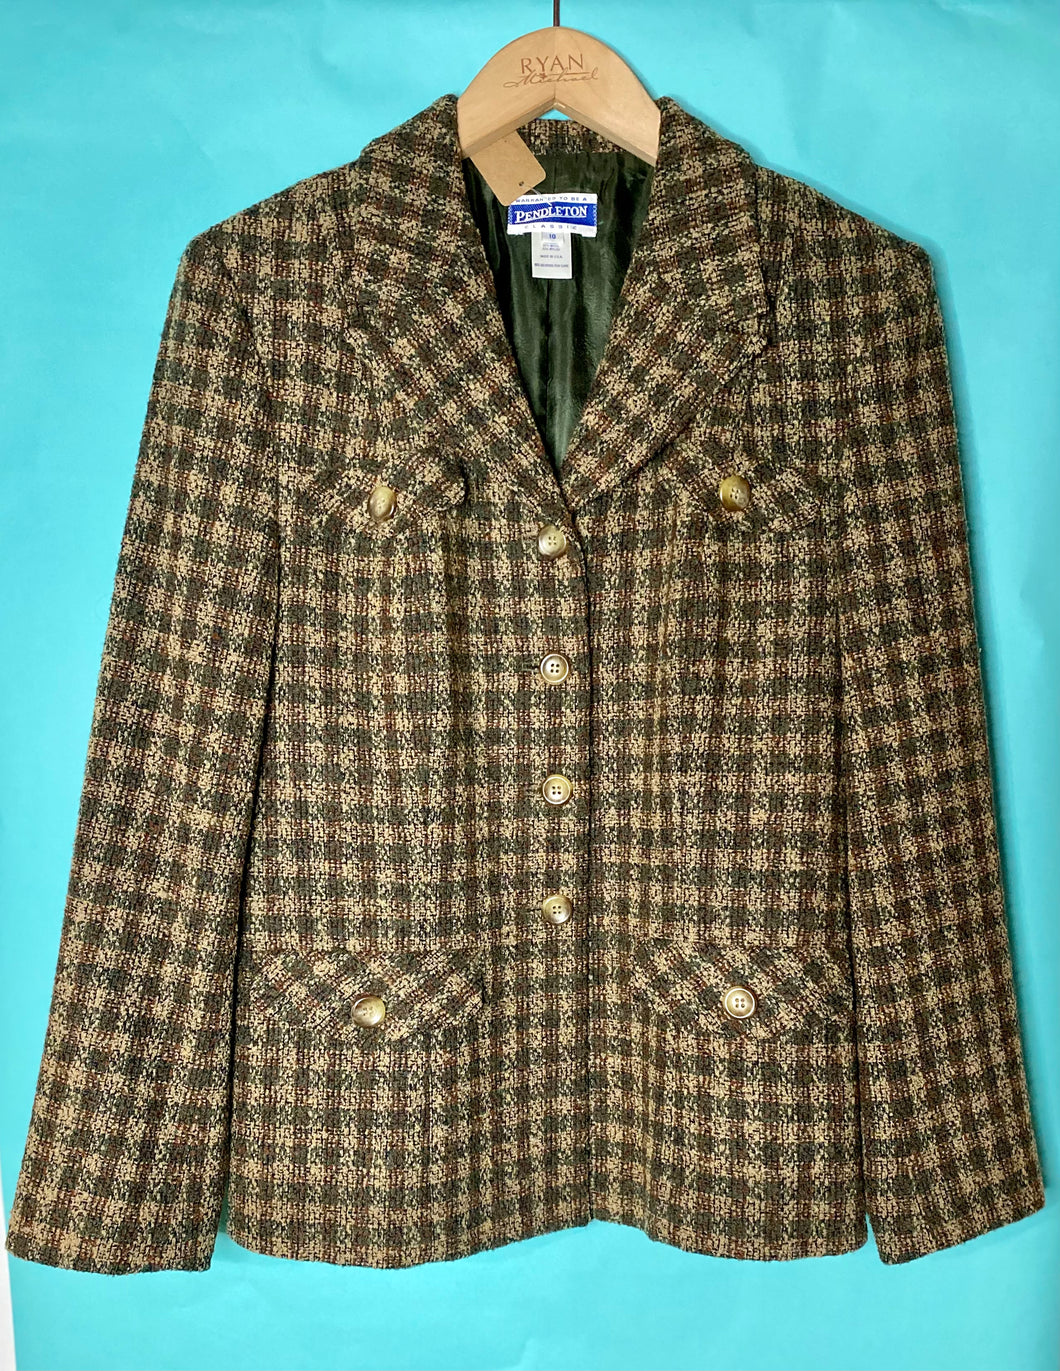 Pendleton Tweed Jacket button front- Size 10 - Sold as is with small tear in back